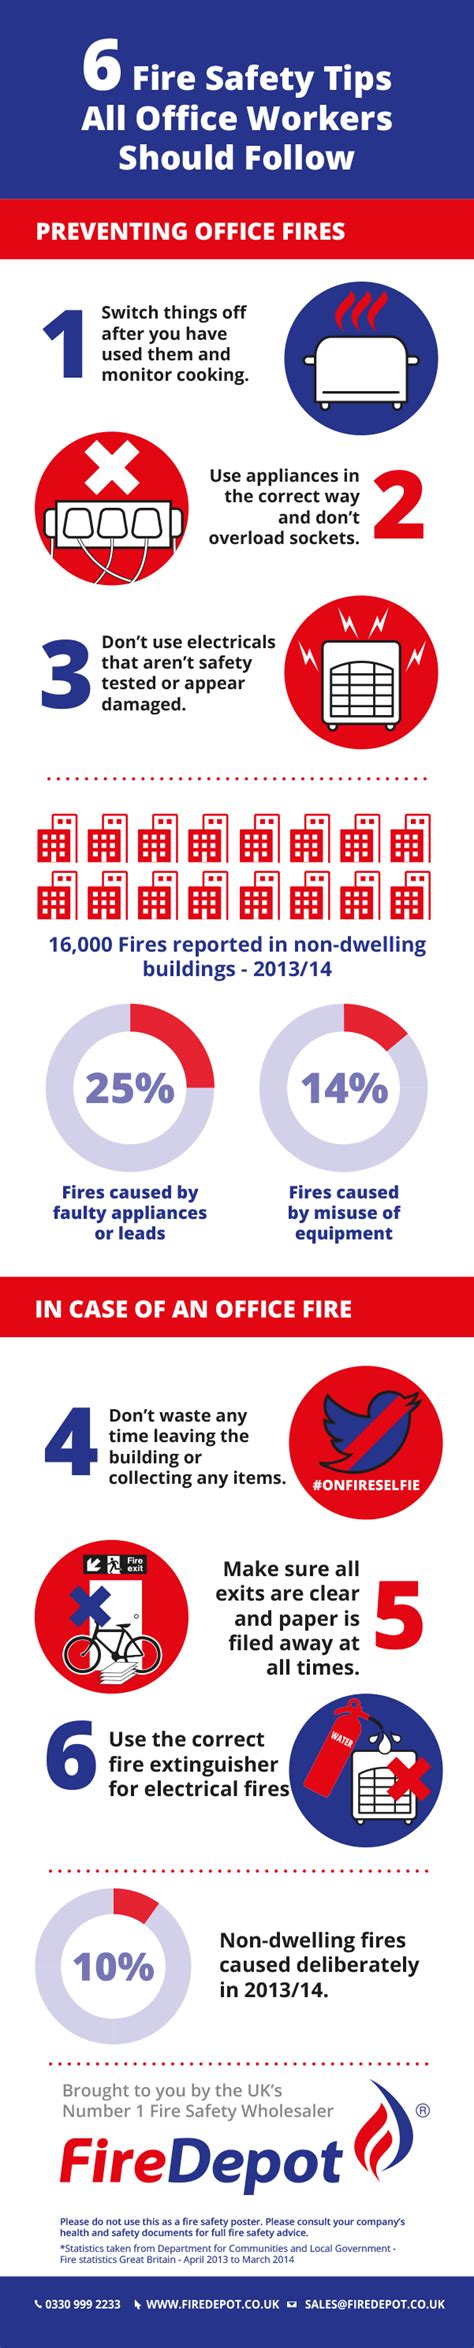 Line Of Fire Safety Infographic Safety Talk Ideas Safety Infographic